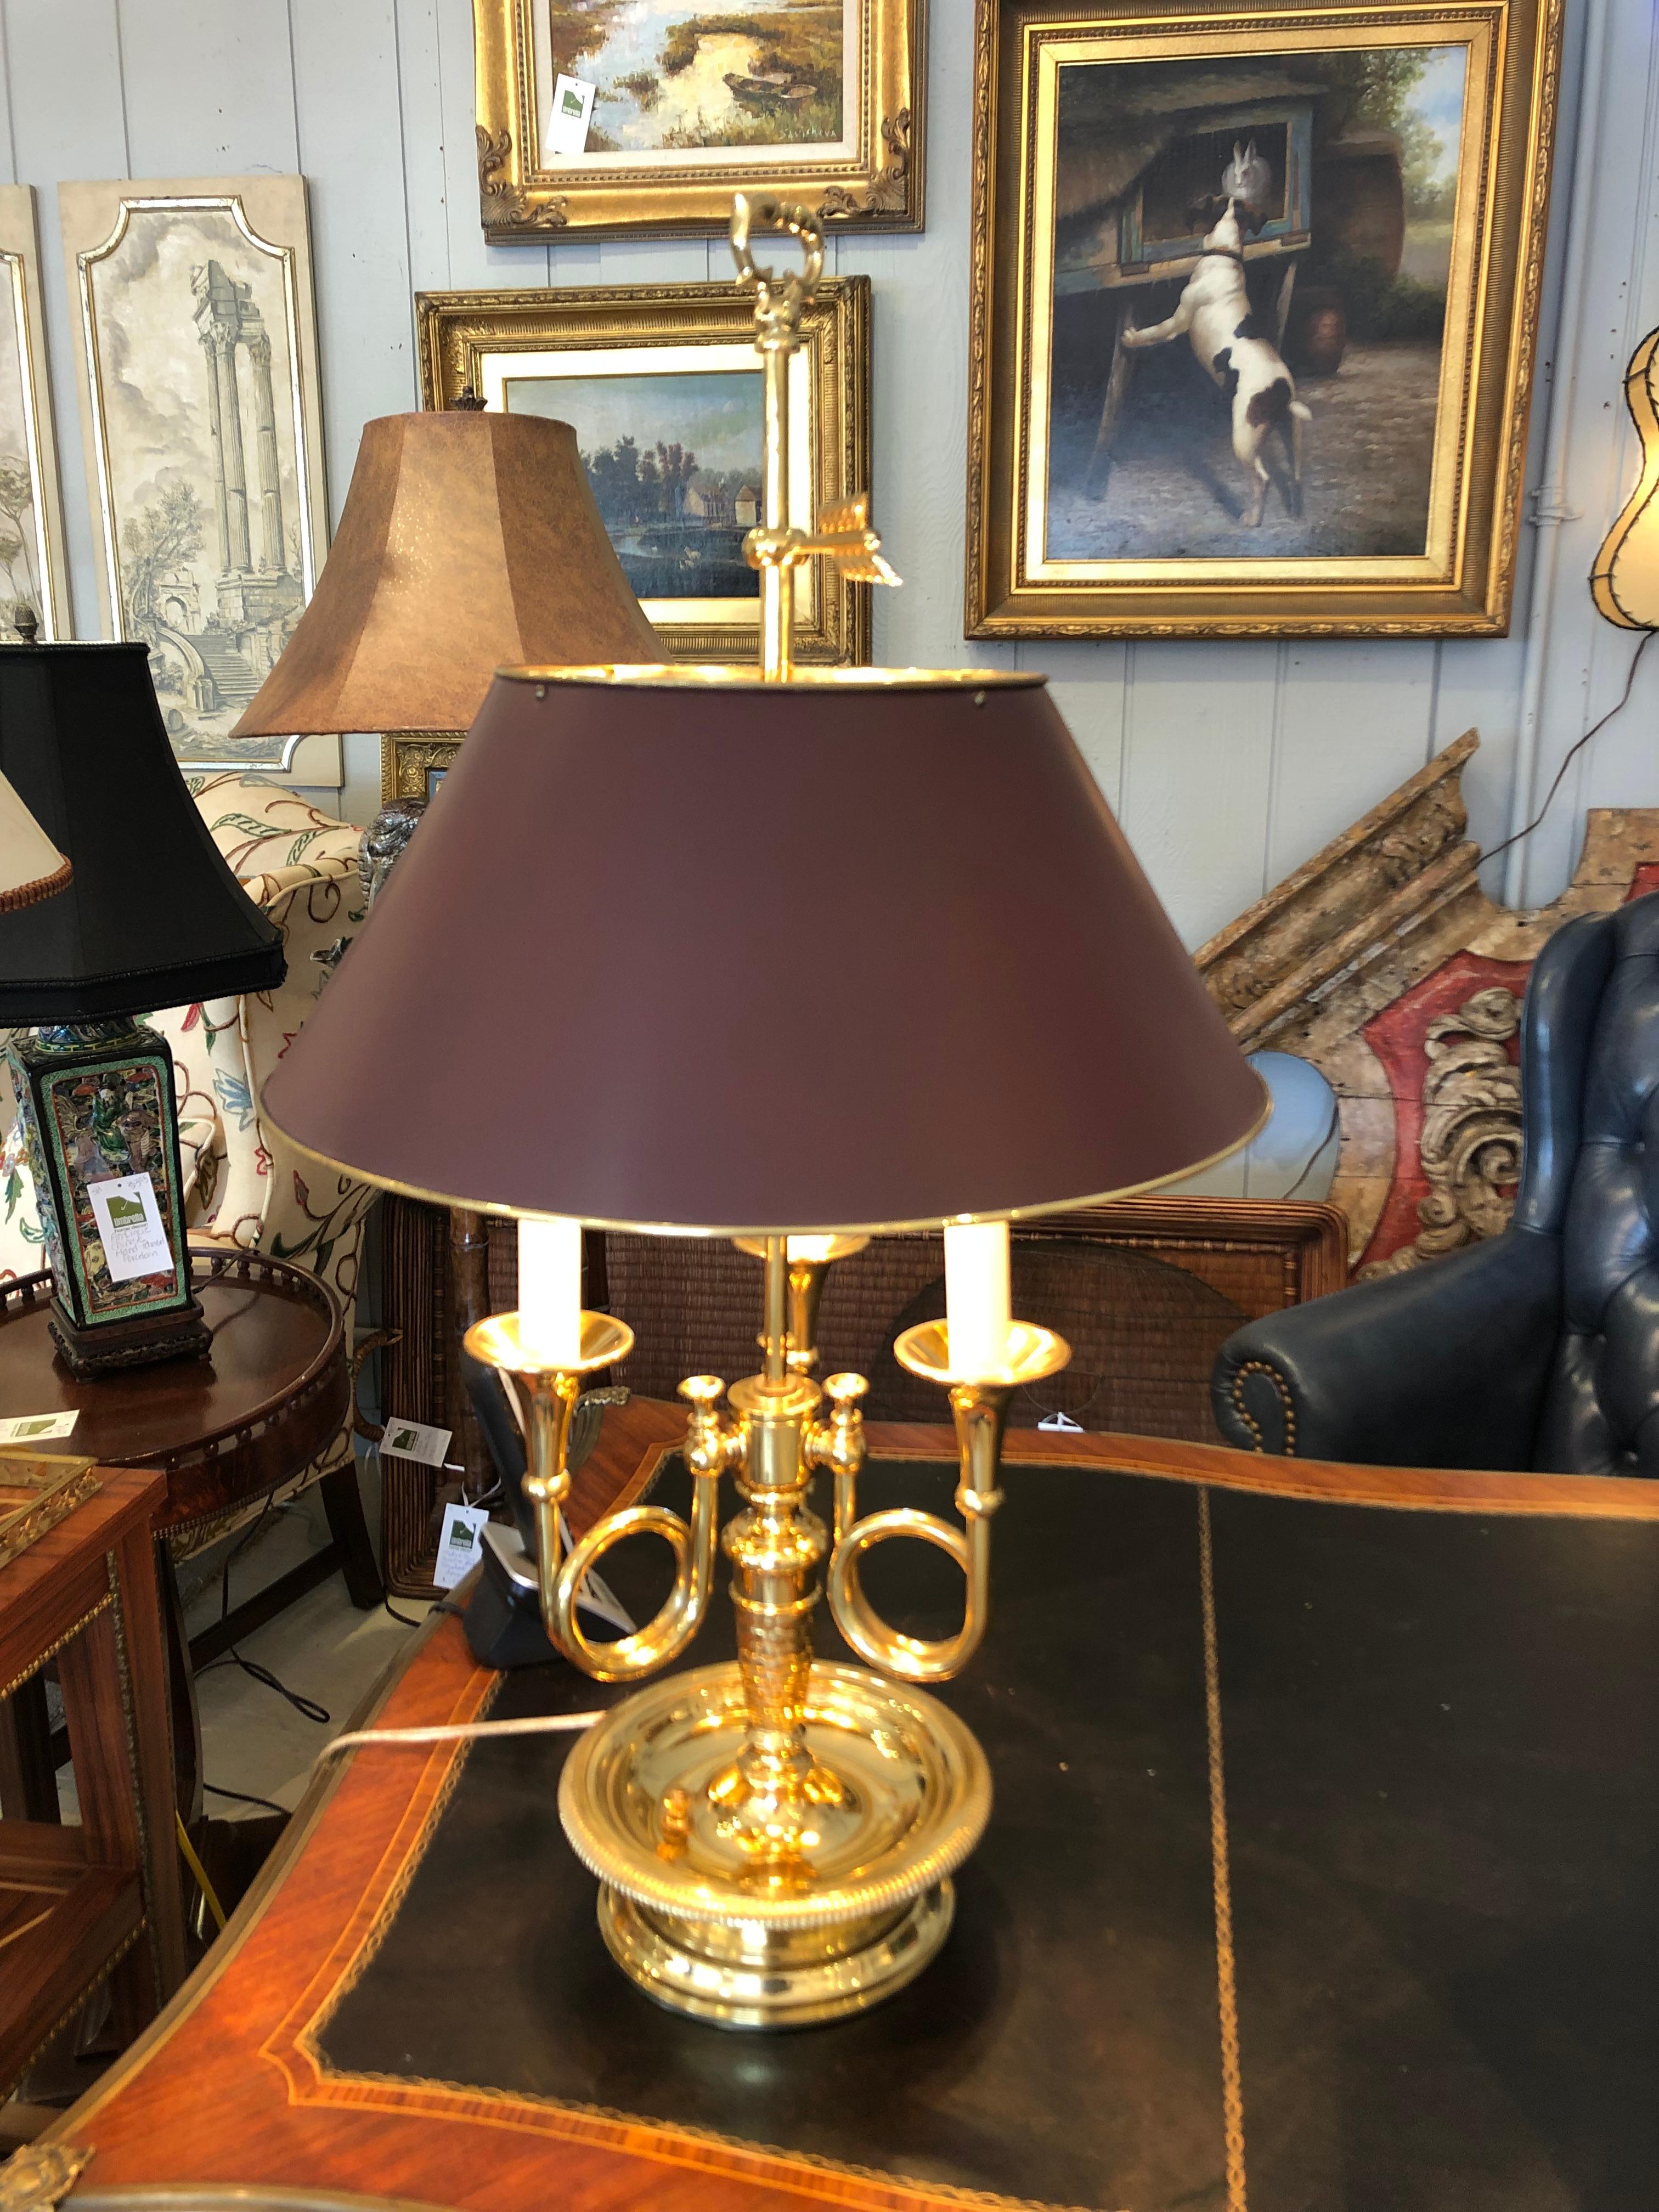 Classically handsome adjustable buillotte table lamp having 3 French horns as the arms, beautiful detailing on the brass, and yummy dark browish burgundy maroon metal shade lined in brass.
Base is 7.5 diameter.